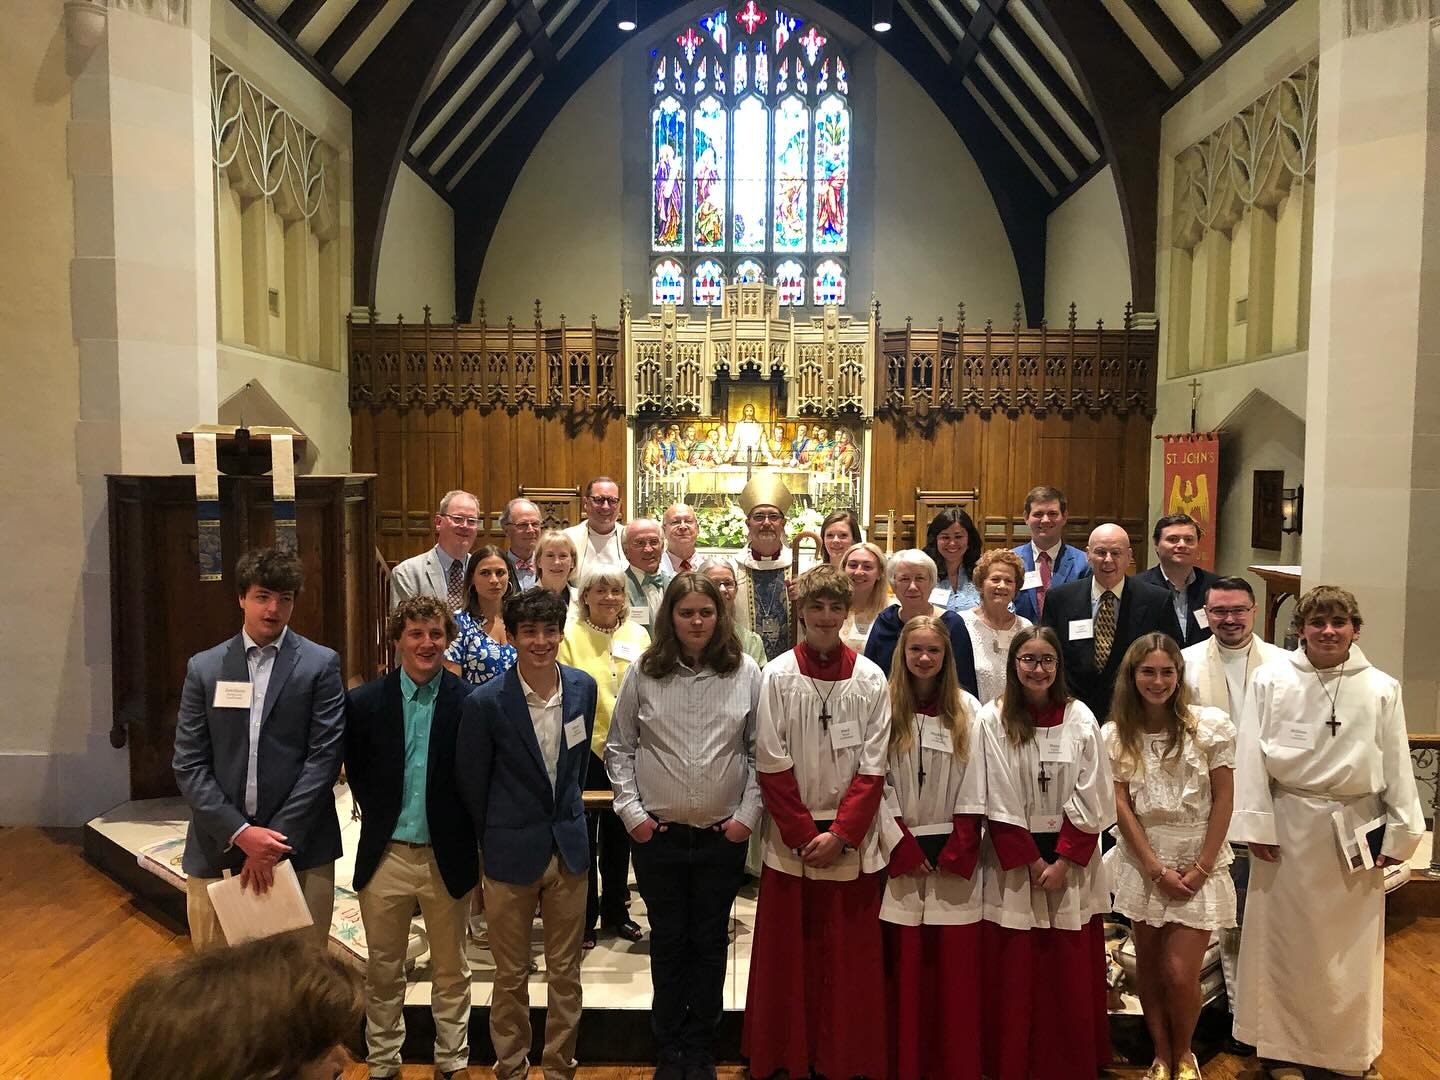 We had an amazing service of Baptism, Confirmation, Reception and Reaffirmation yesterday with 25 new people joining the church or reaffirming their faith. Thanks for visiting us, Bishop Mark! @episcoswvayouth